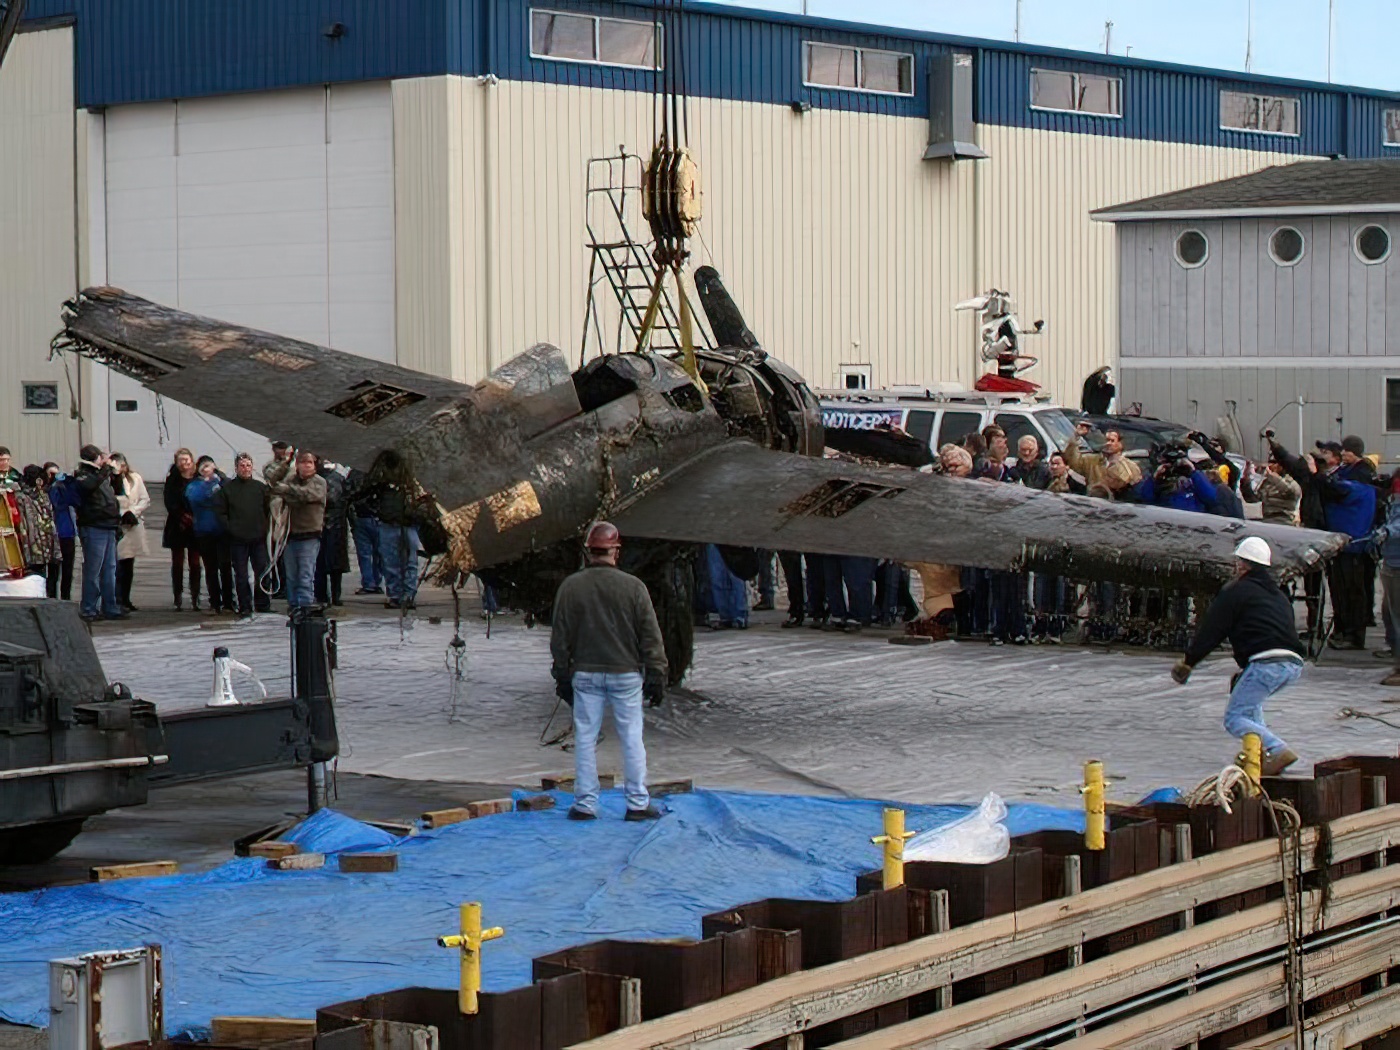 A General Motors/Eastern Aircraft Division FM-2 "Wildcat" was pulled out of Lake Michigan on Dec. 7, 2012 after spending 68 years beneath the waves. The aircraft, Bureau Number 57039, was cut in half by the U.S.S. Sable after ditching